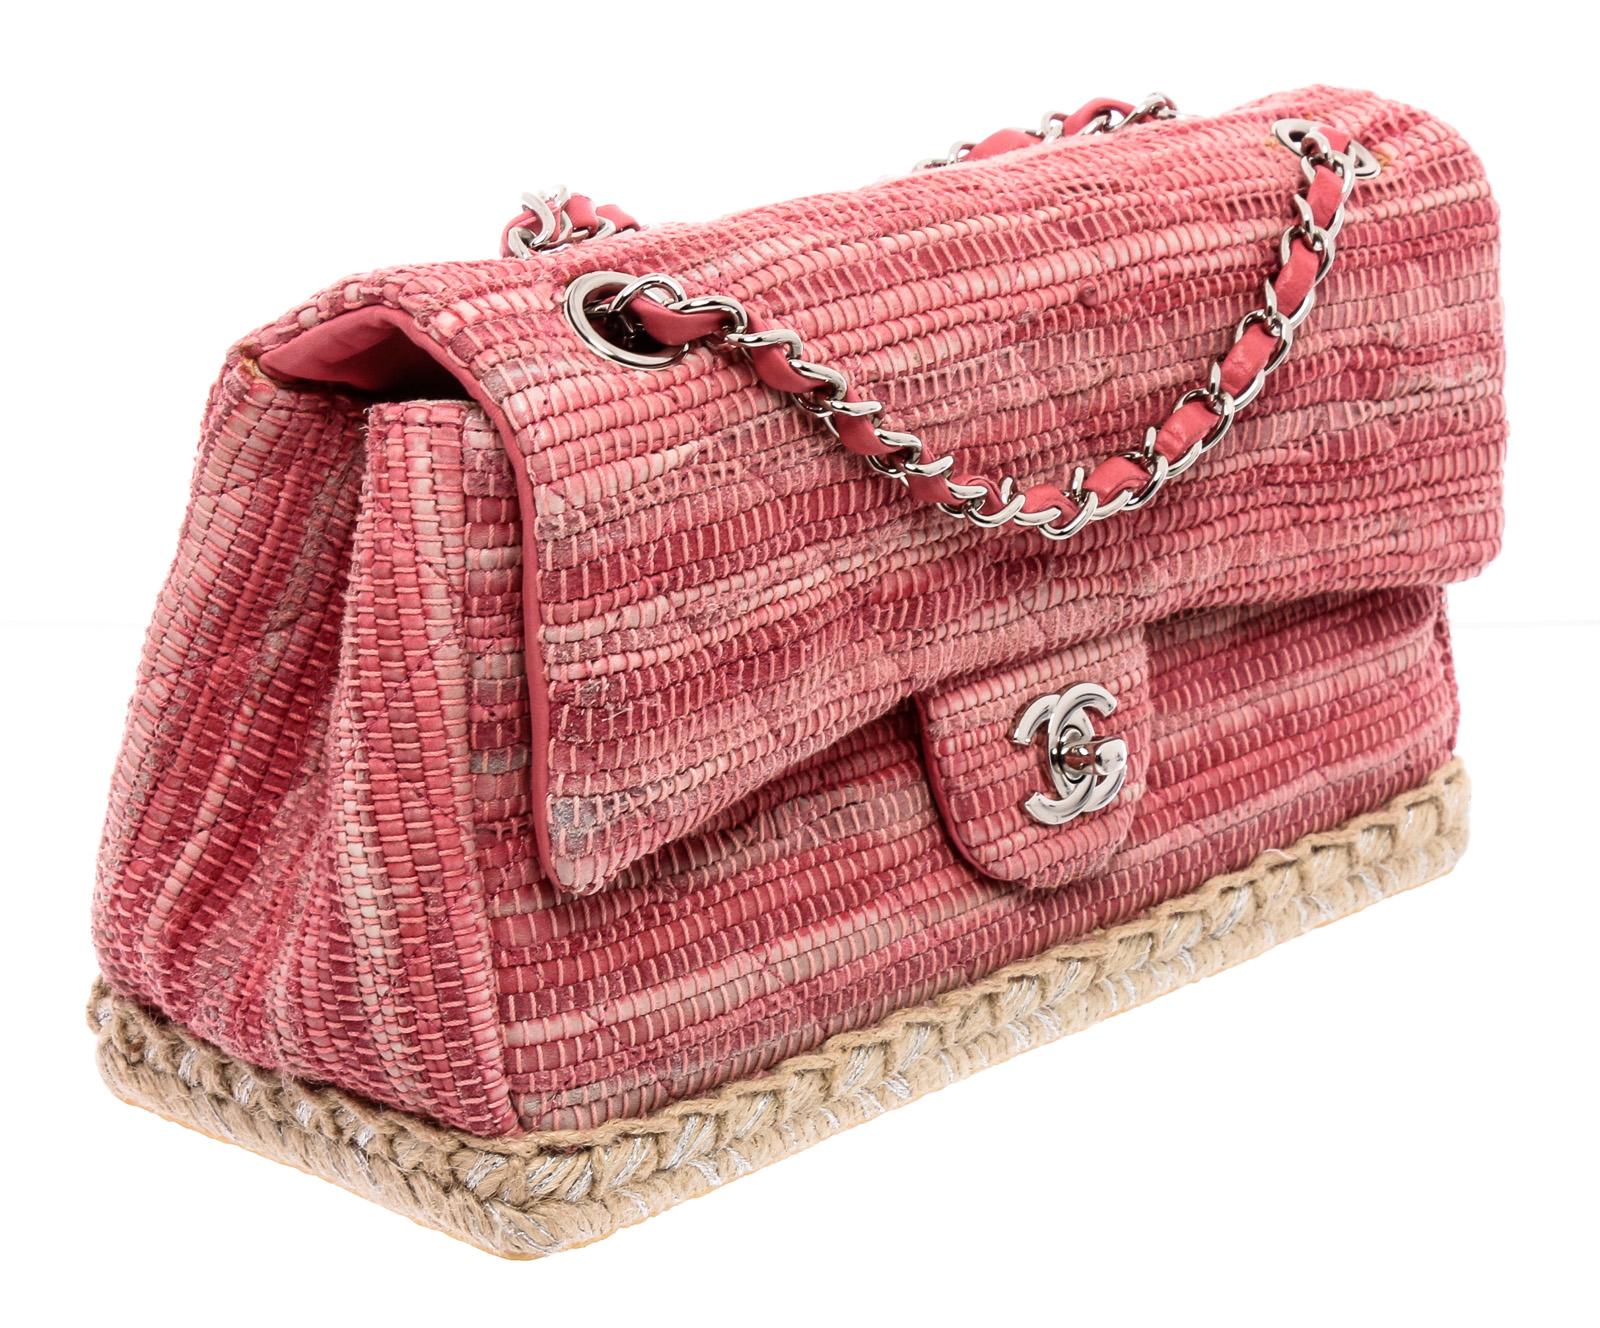 From the Chanel Cruise 2011 collection, this Quilted Pink Tweed Espadrille Chain Flap bag features gorgeous multi-colored woven pink fabric in the classic diamond quilted pattern, braided rope details at the bottom and a fashionable yet durable